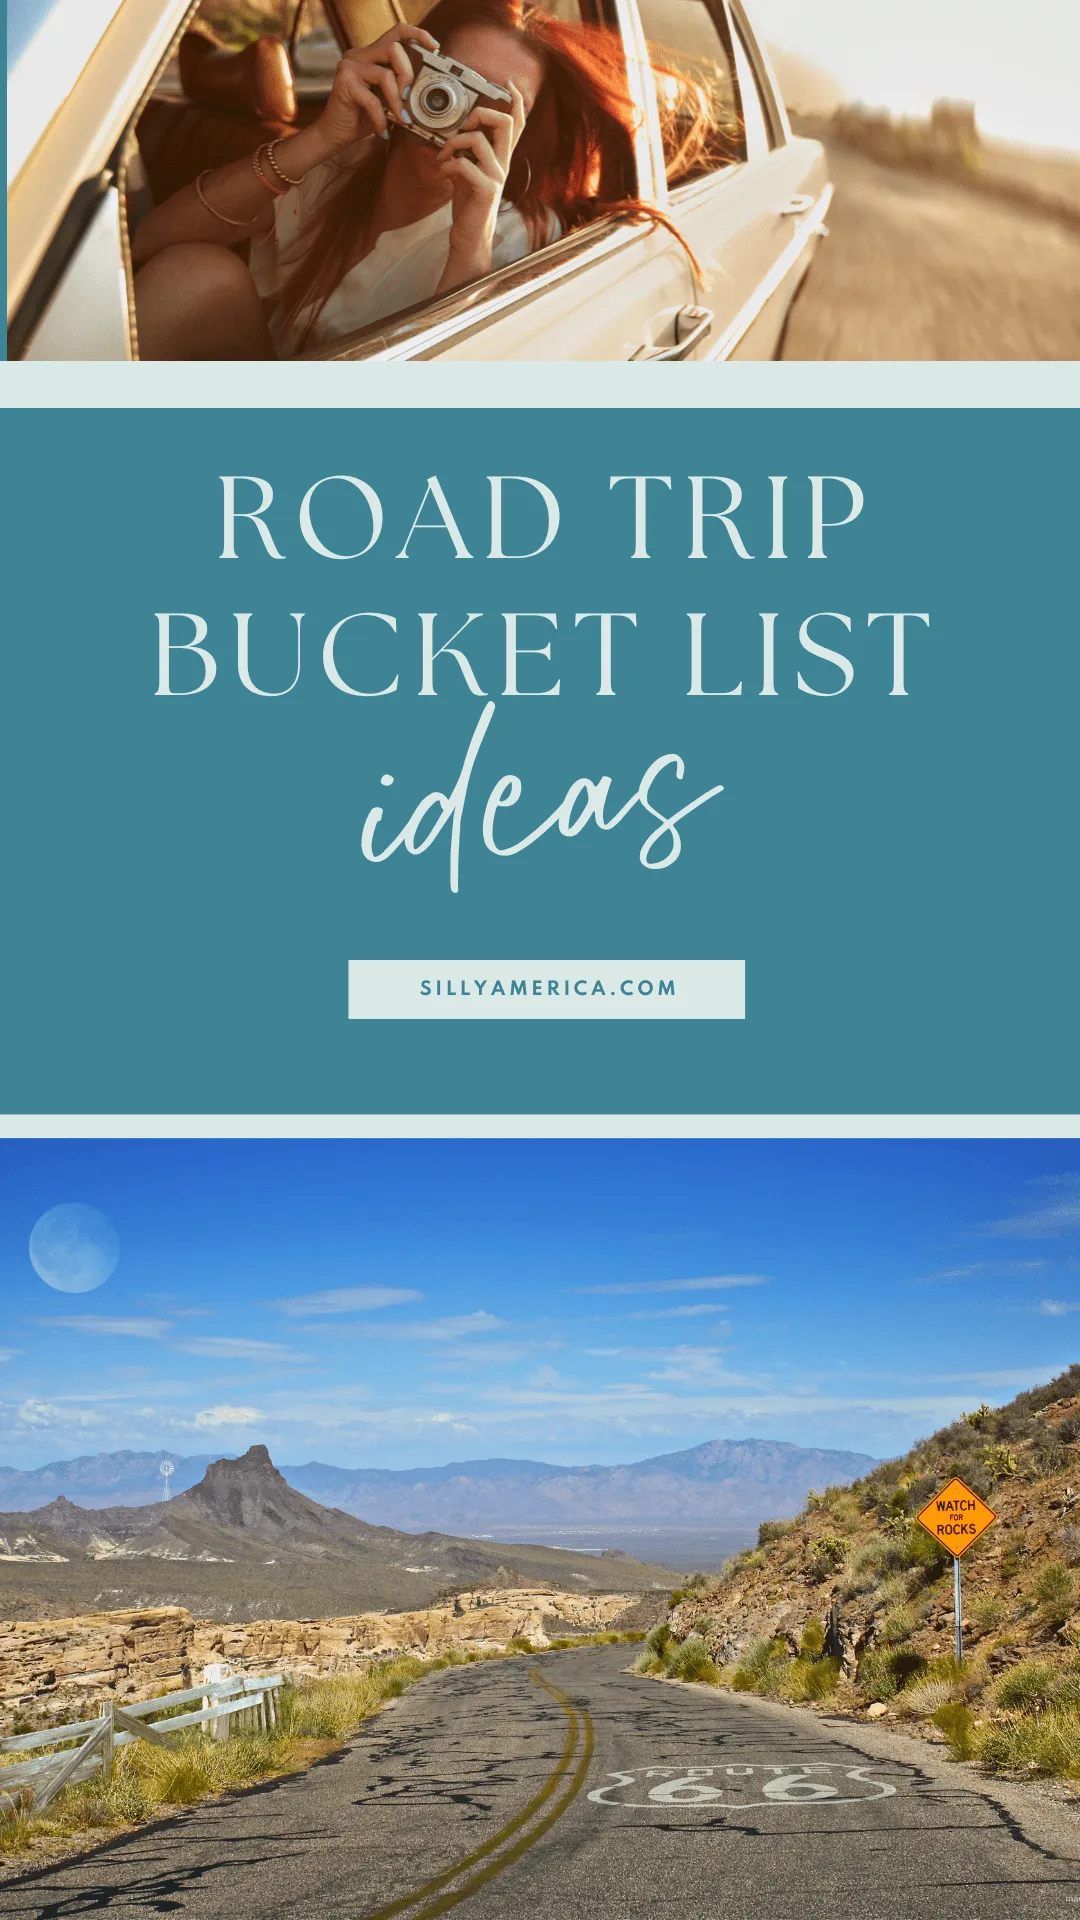 What's on your road trip bucket list? Whether you're looking to build the perfect road trip itinerary or want to craft a travel bucket list full of the most special road trip experiences, we've crafted lists of some of the best road trip bucket list ideas. Find the best road trip bucket list experiences, save the images for inspiration, and download our printable PDF checklists to keep track of everything you check off your life list! #RoadTrip #RoadTripBucketList #BucketListIdeas #BucketList